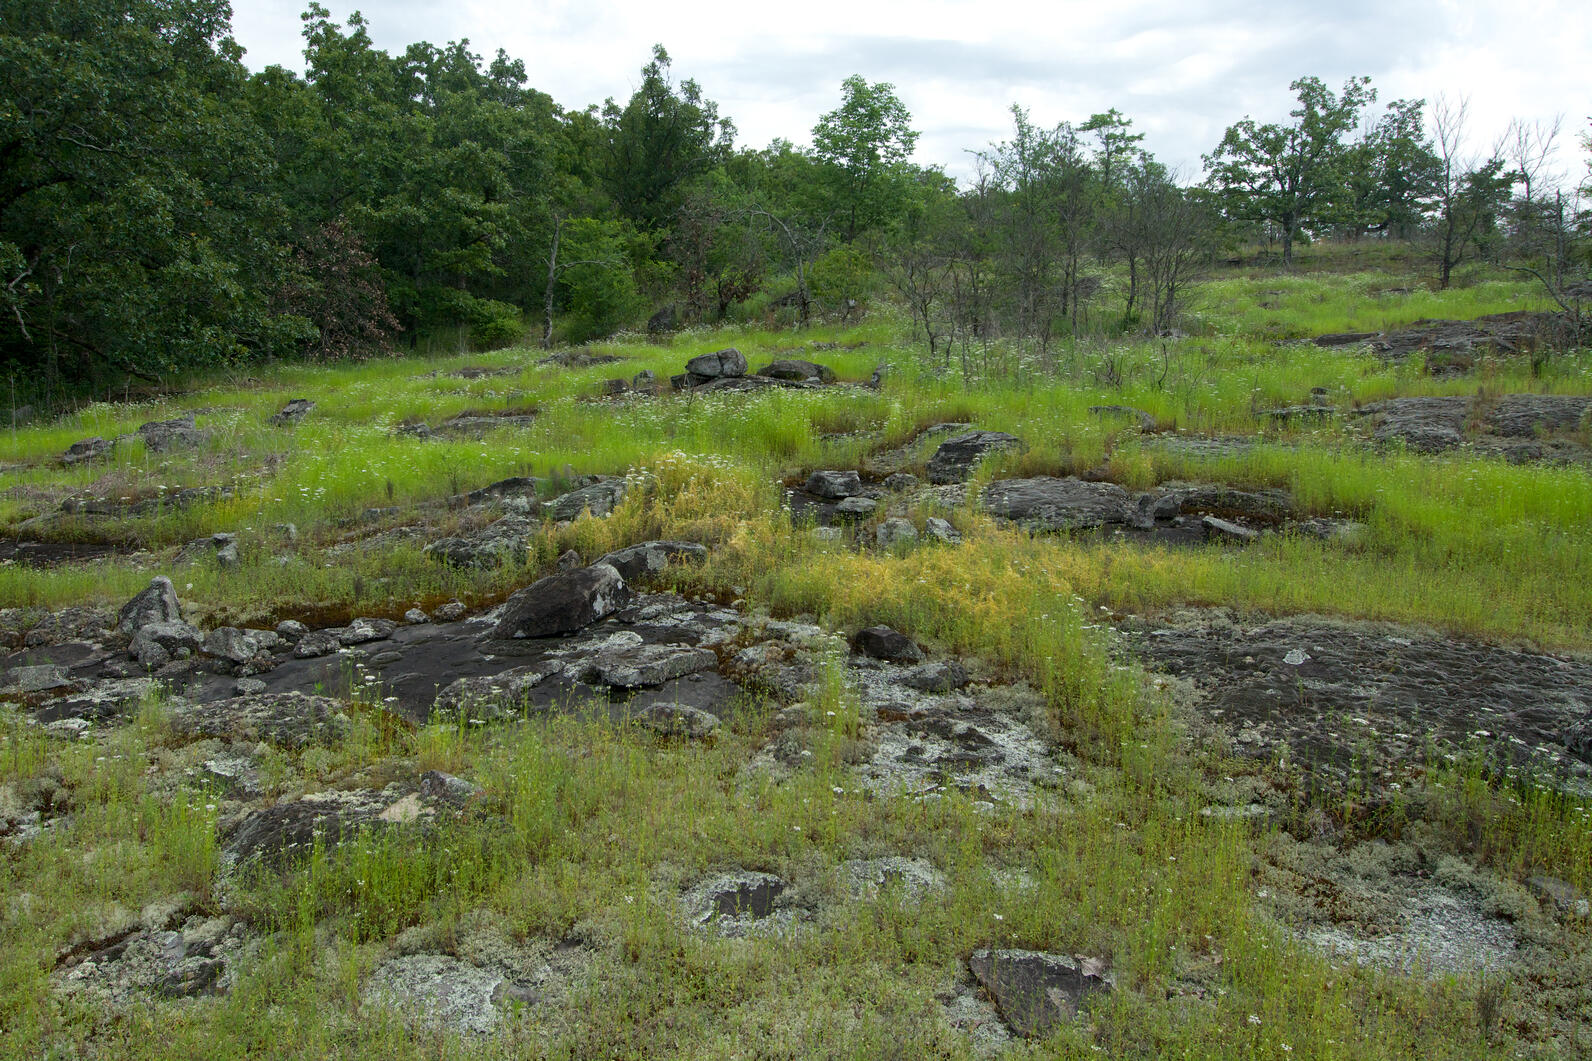 A rocky and grassy area on the edge of a forest of trees.